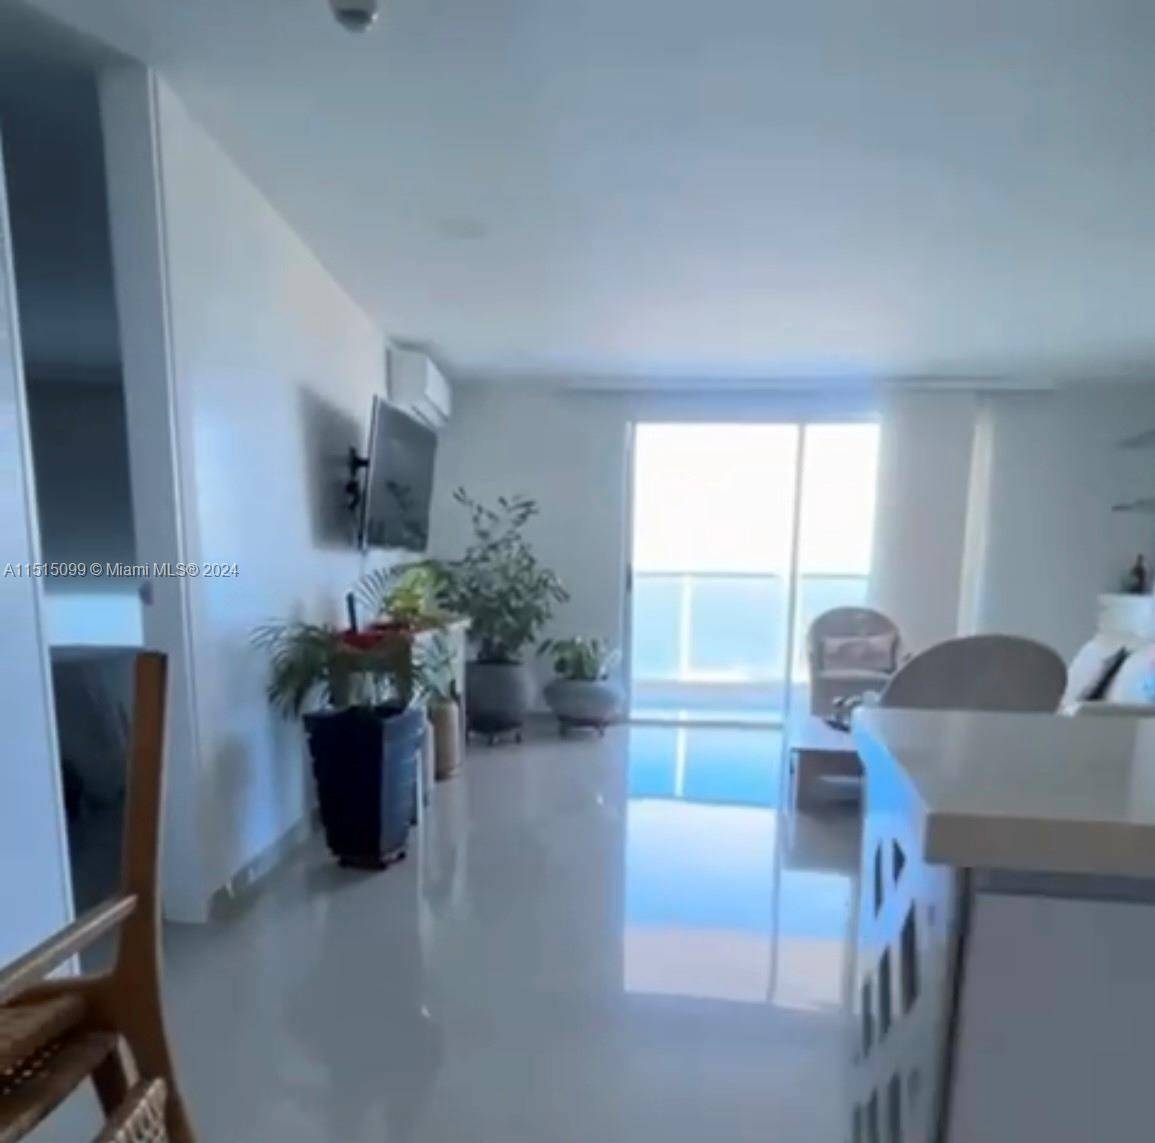 You are looking for where to invest in the city of Cartagena, I present to you this excellent option with a high valuation, apartment with luxury finishes located in the ...